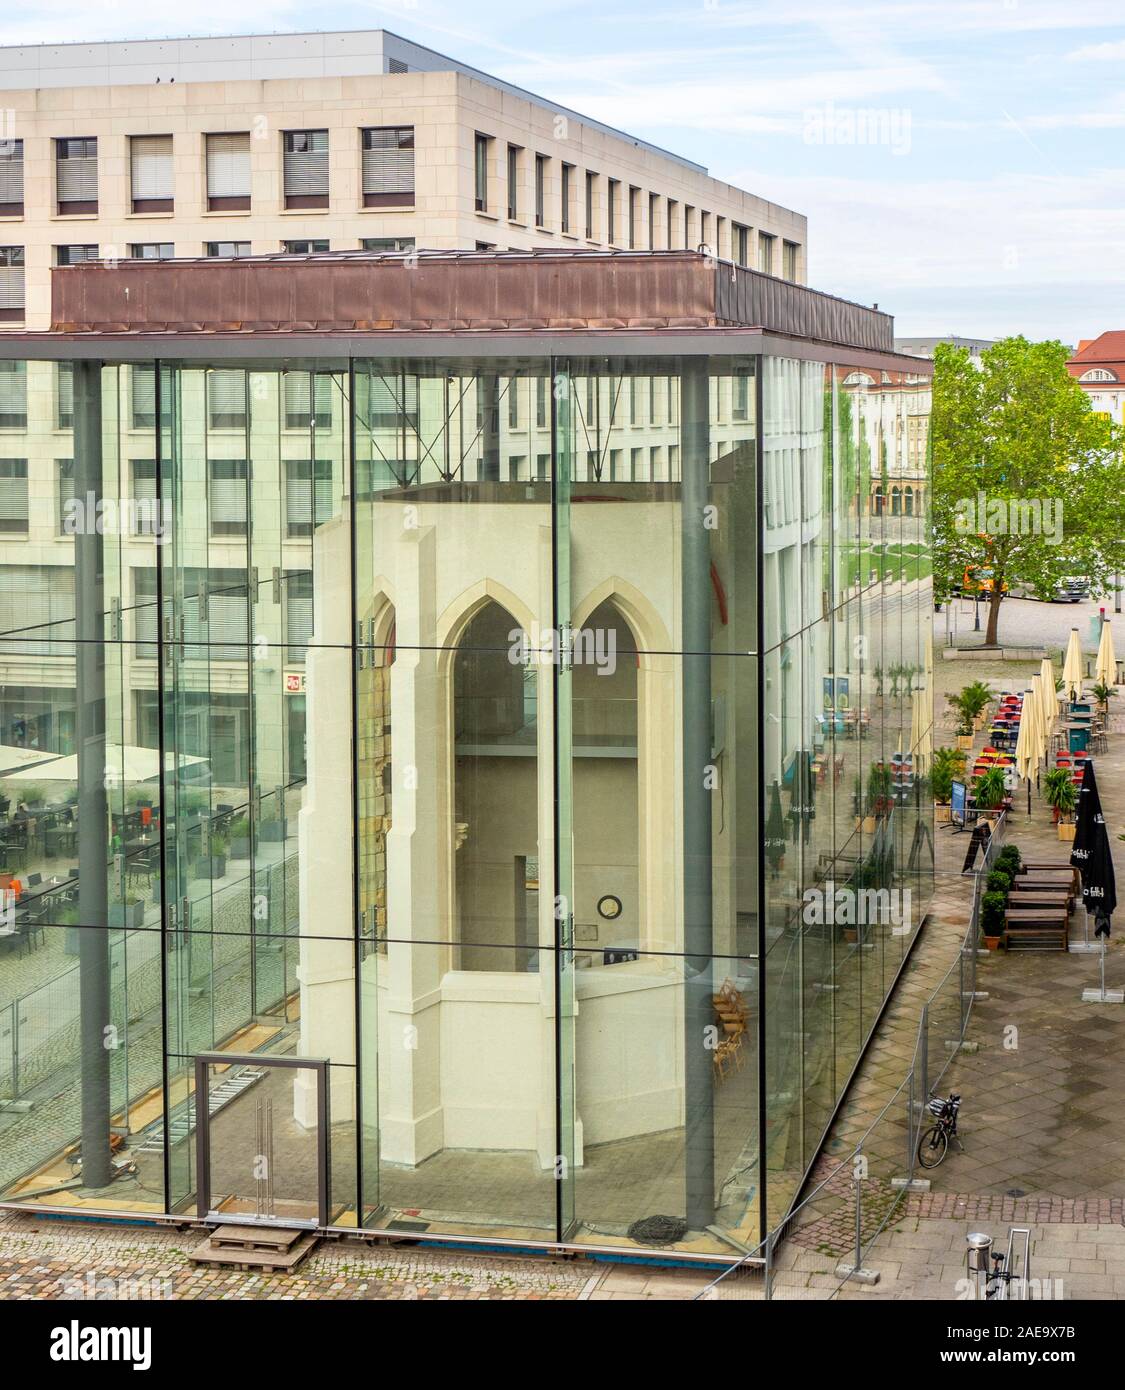 Remains of Busmann Chapel encased in a glass enclosure in Altstadt Dresden Saxony Germany. Stock Photo